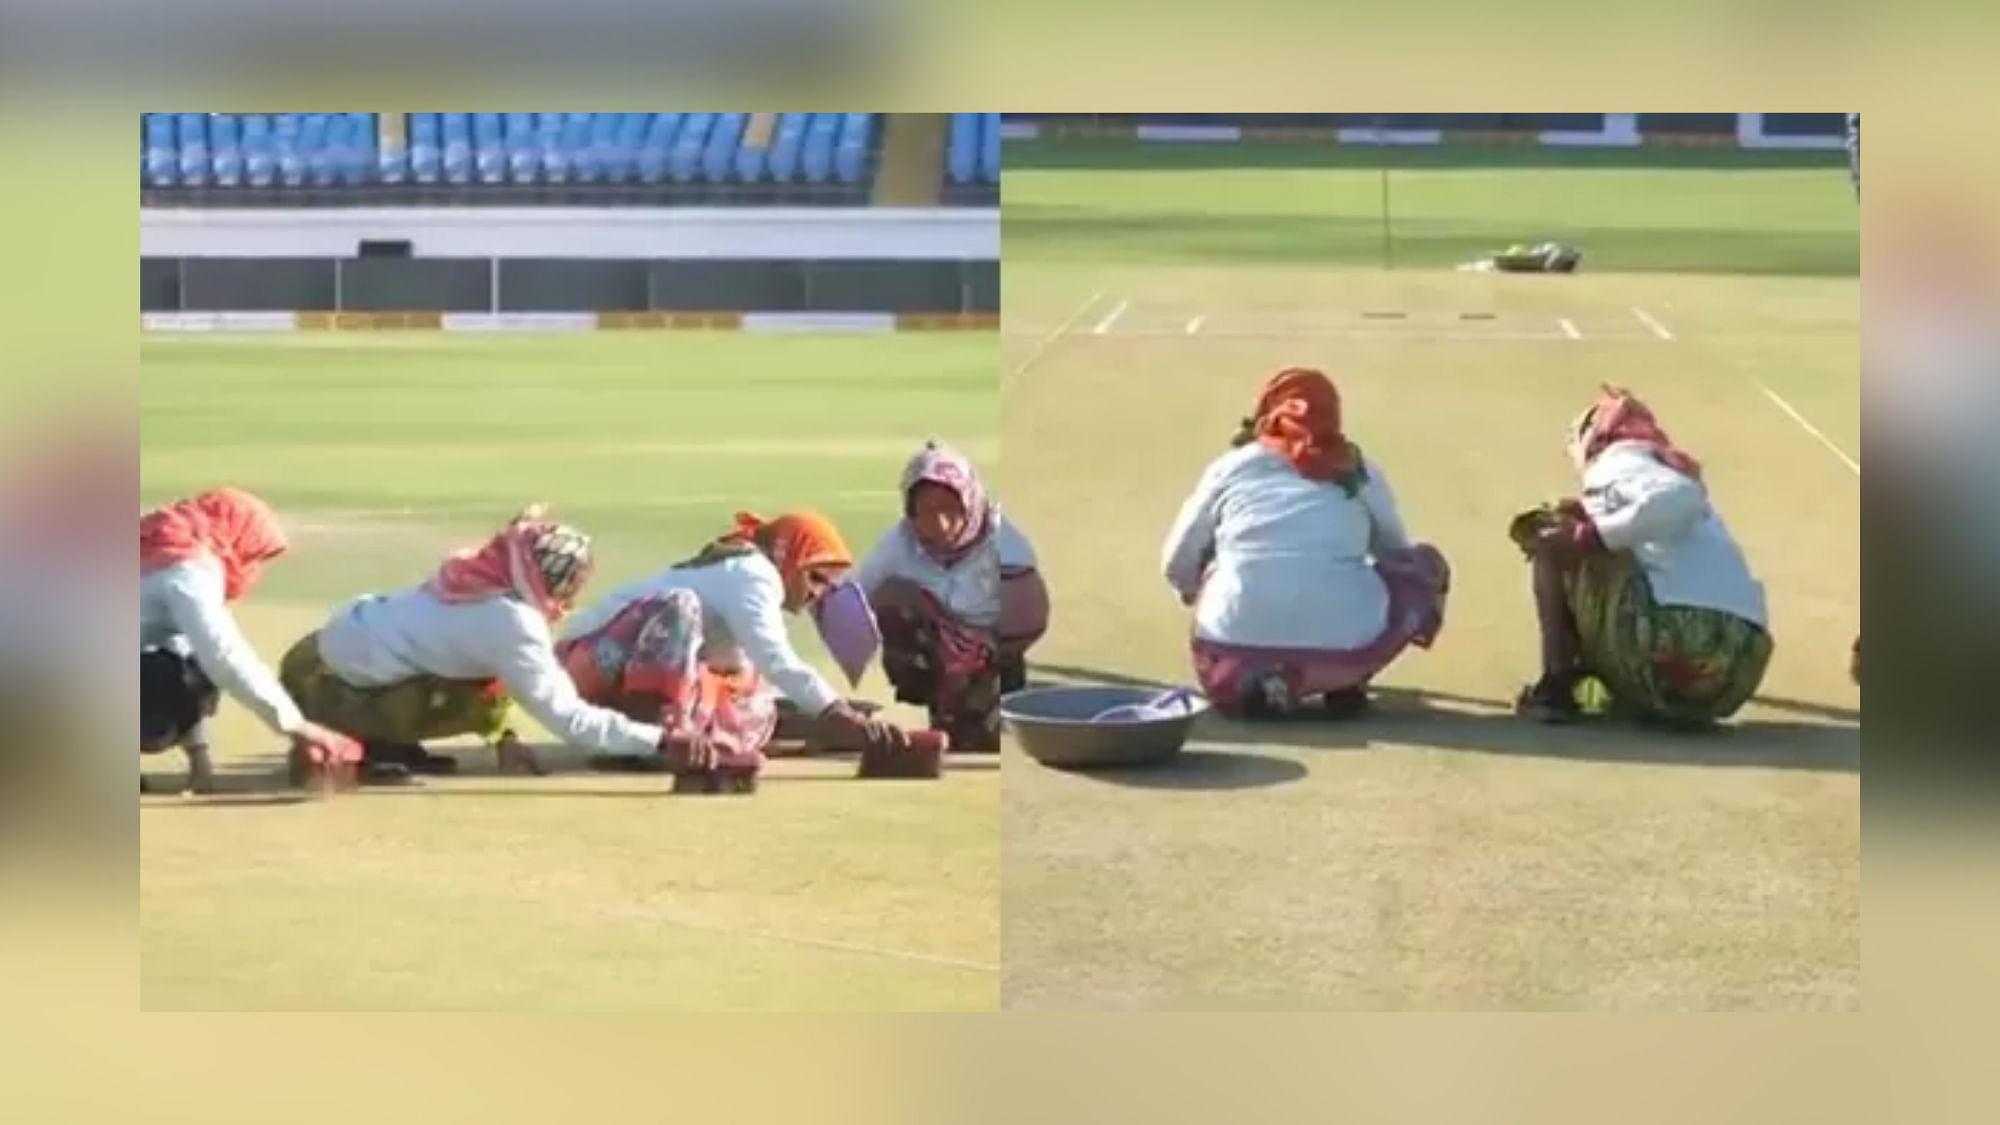  In the video clip the ladies are seen cleaning the pitch with brushes while kneeling down on the wickets.